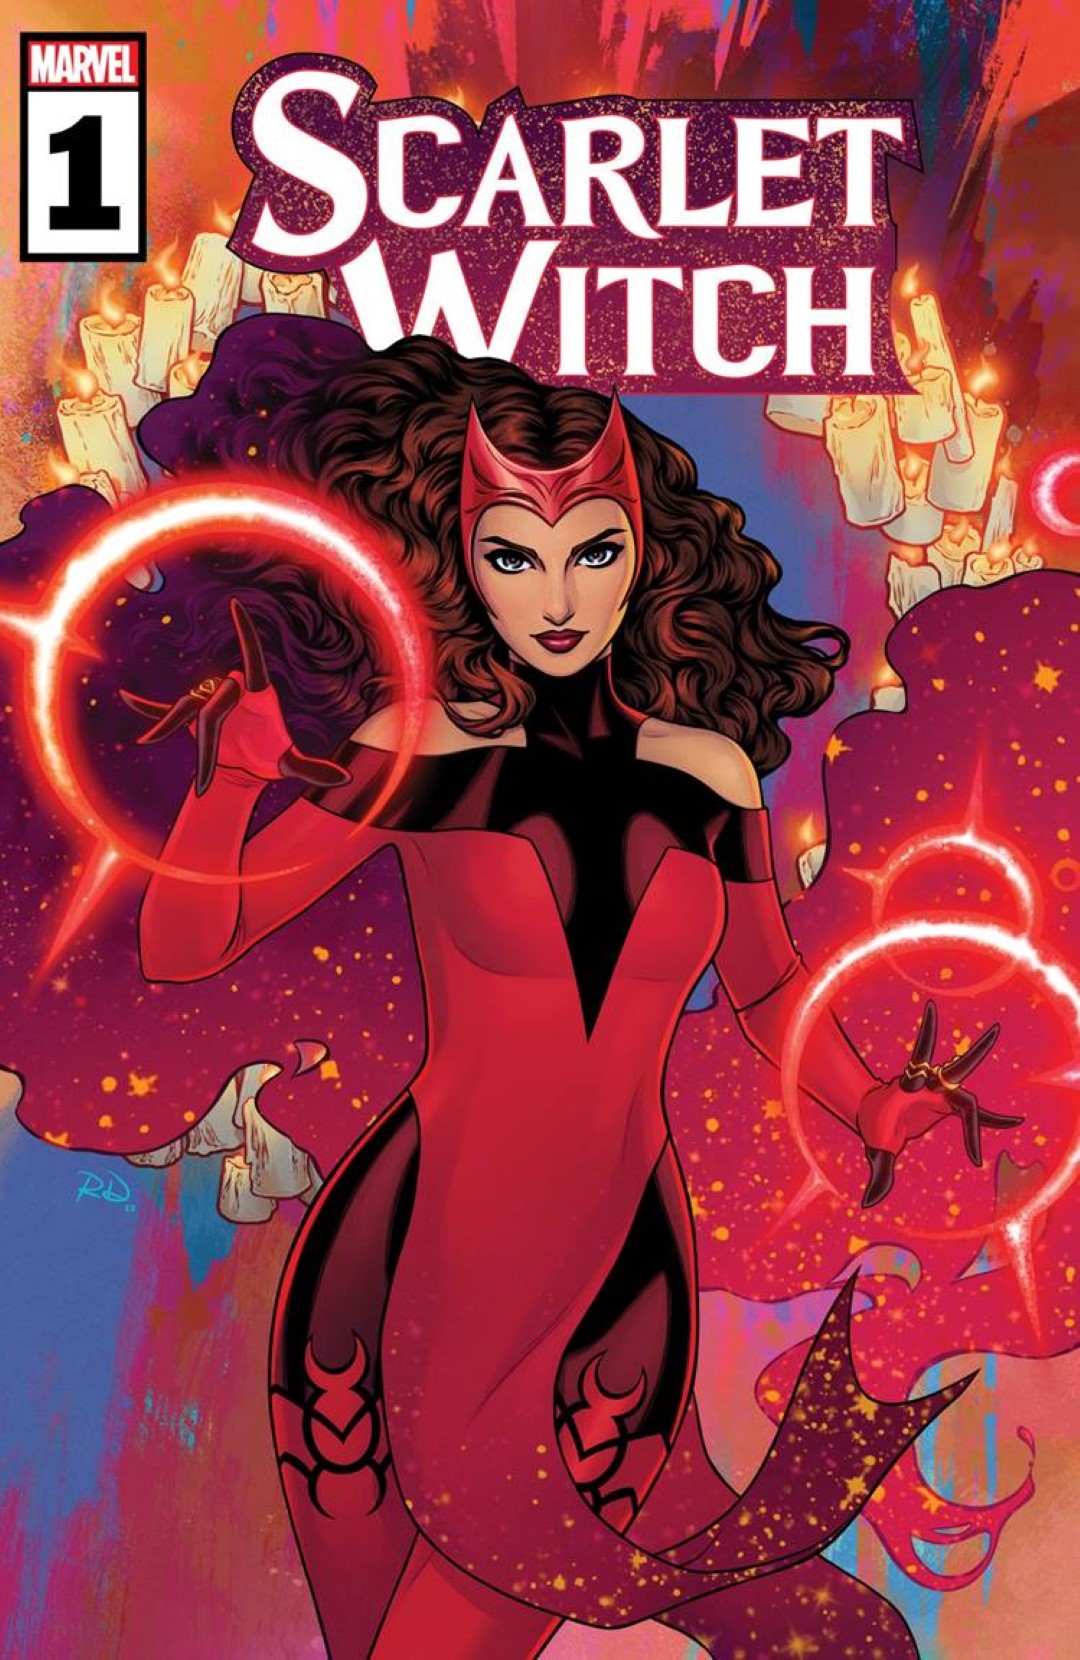 Magneto Scarlet Witch Porn - wanda maximoff News, Rumors and Information - Bleeding Cool News And Rumors  Page 1